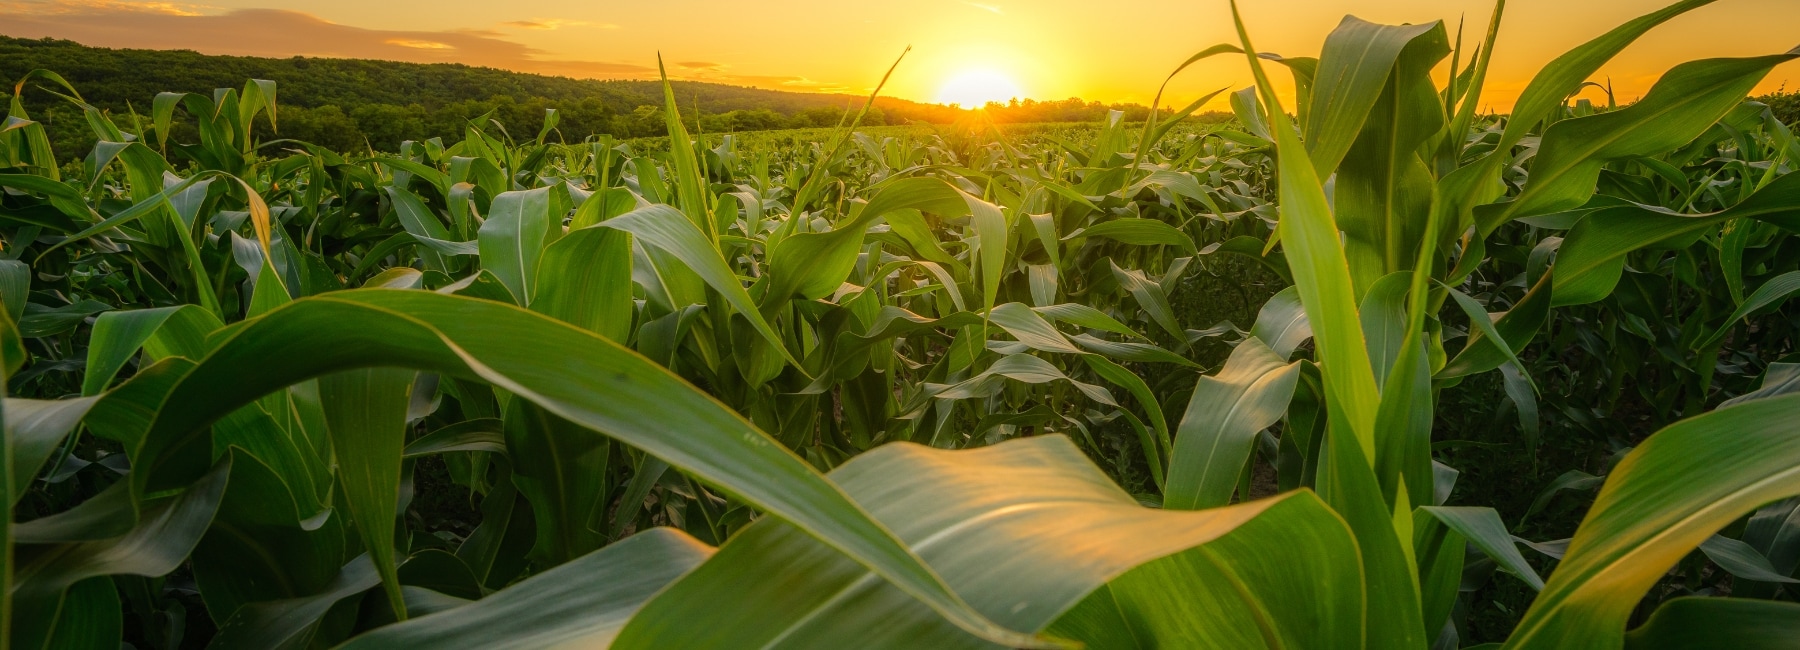 Field of cobs at sunset